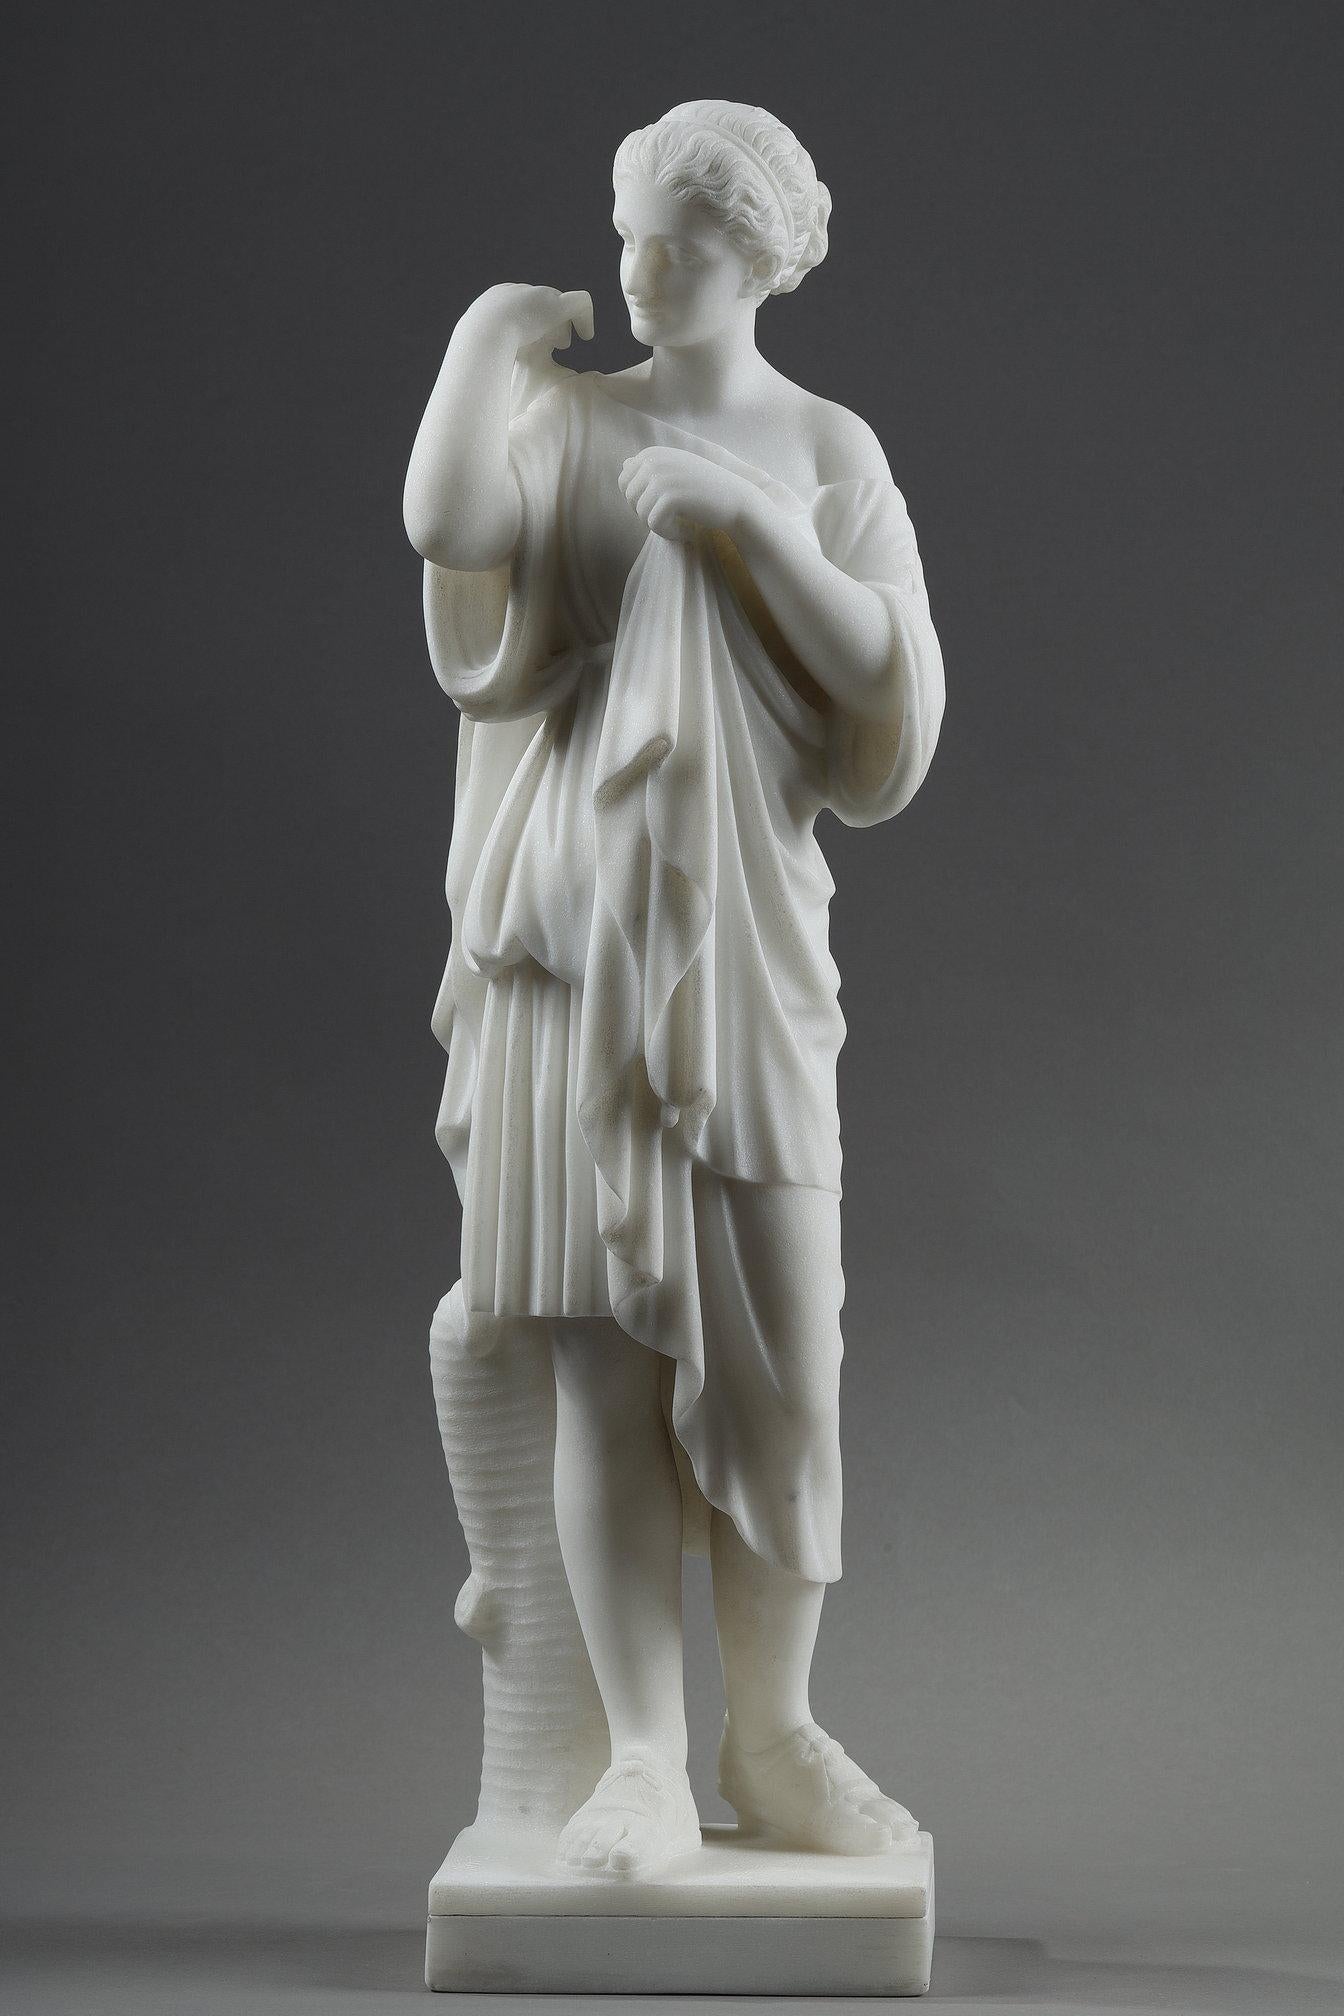 Marble sculpture depicting Artemis, goddess of the hunt, wearing a short tunic and Roman sandals. She fastens her cloak over her right shoulder with a fibula.

Our signed de Pugi sculpture is a late 19th century replica of Artémis dite Diane de